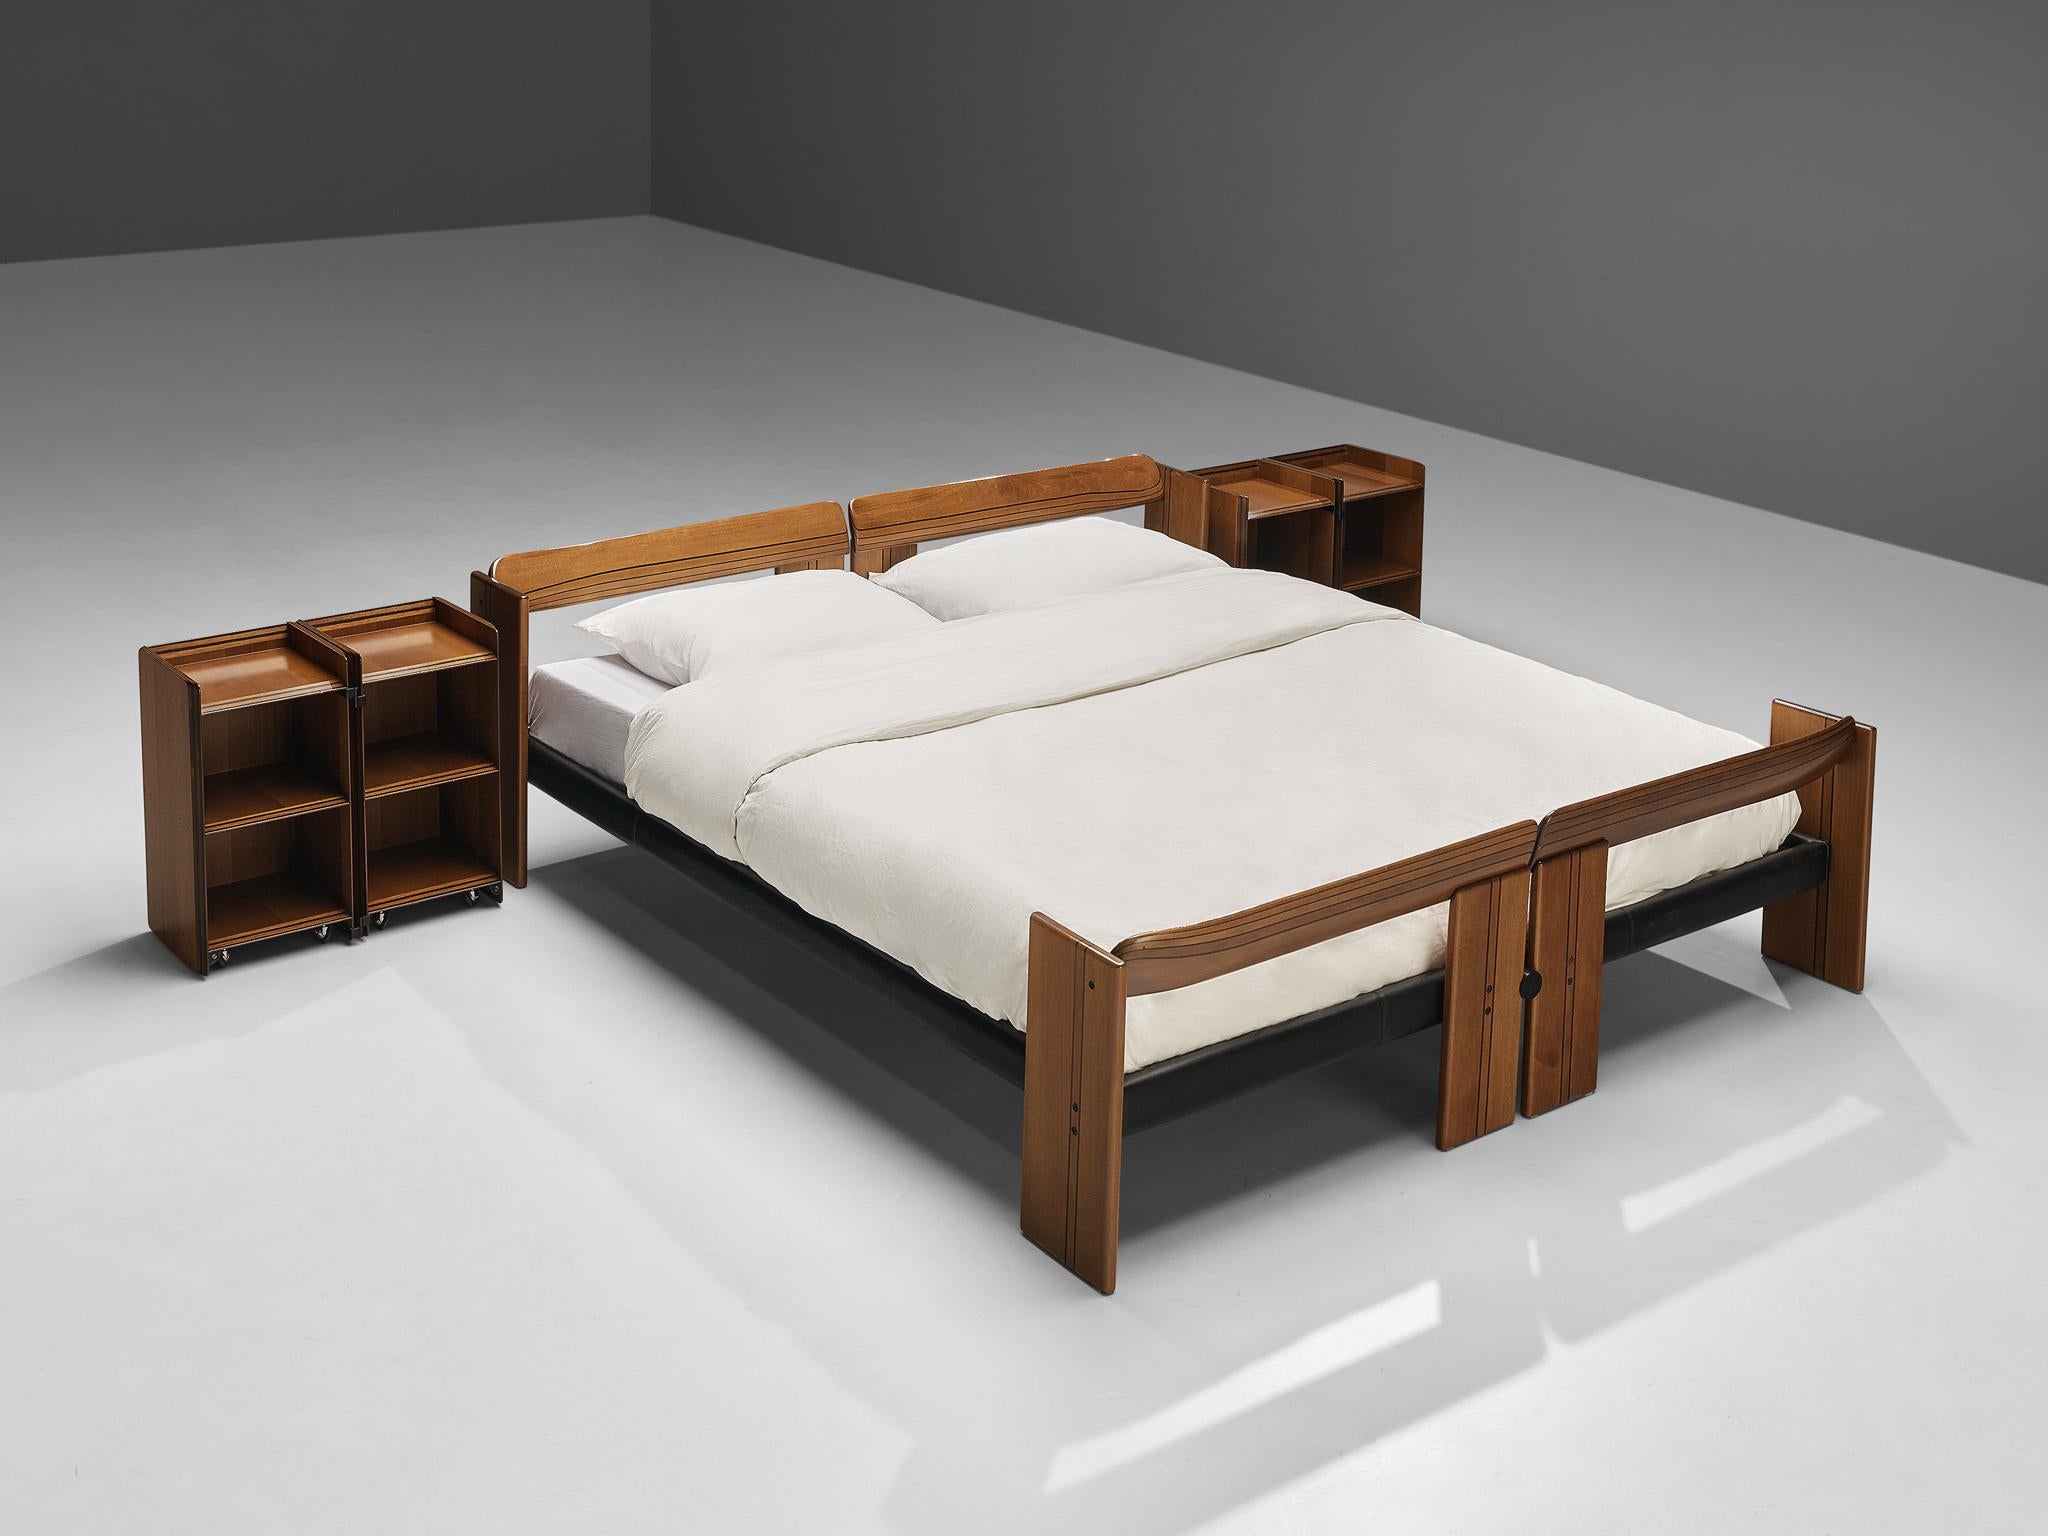 Afra & Tobia Scarpa, 'Artona' bed with nightstands, walnut, metal, Italy, 1975.

The Artona line by the Scarpa duo was in fact the first line ever produced by Maxalto, the specialist division of B&B Italia. Maxalto was originally set up in 1975 as